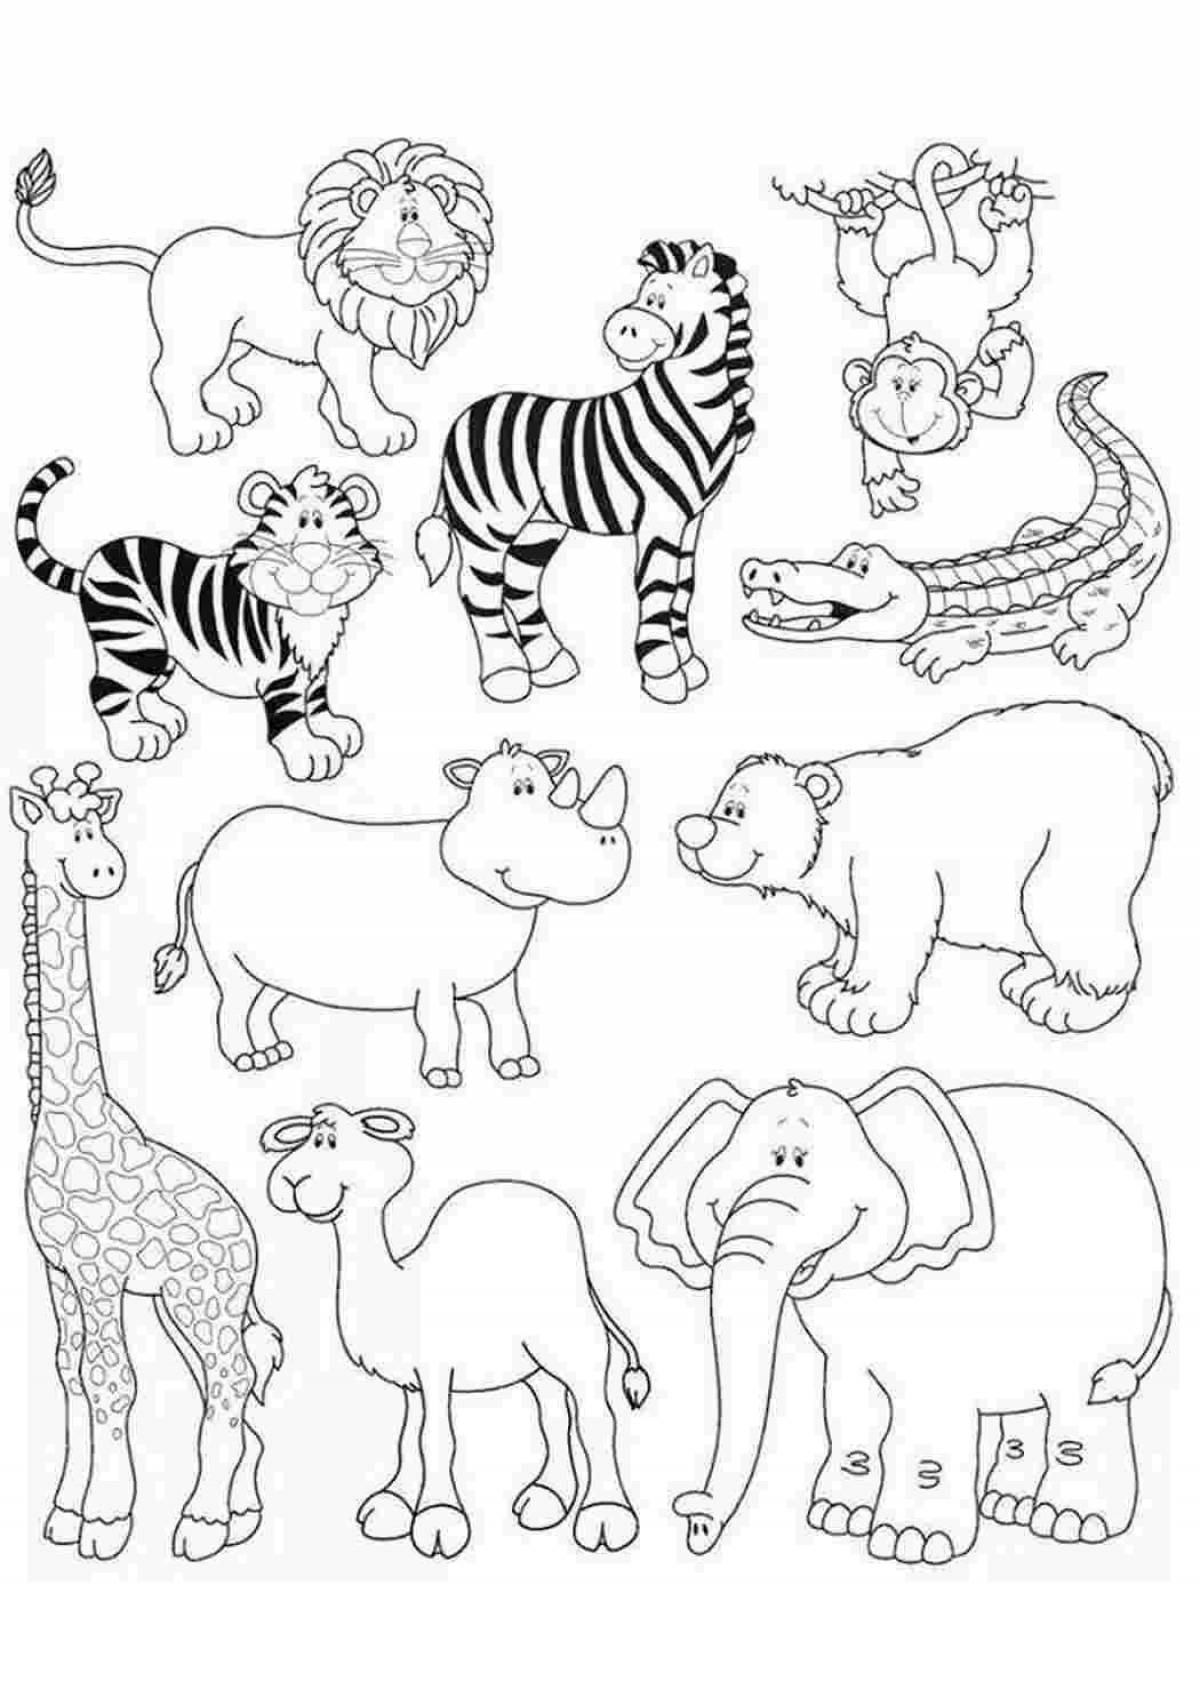 Funny African animals coloring book for kids 5-7 years old